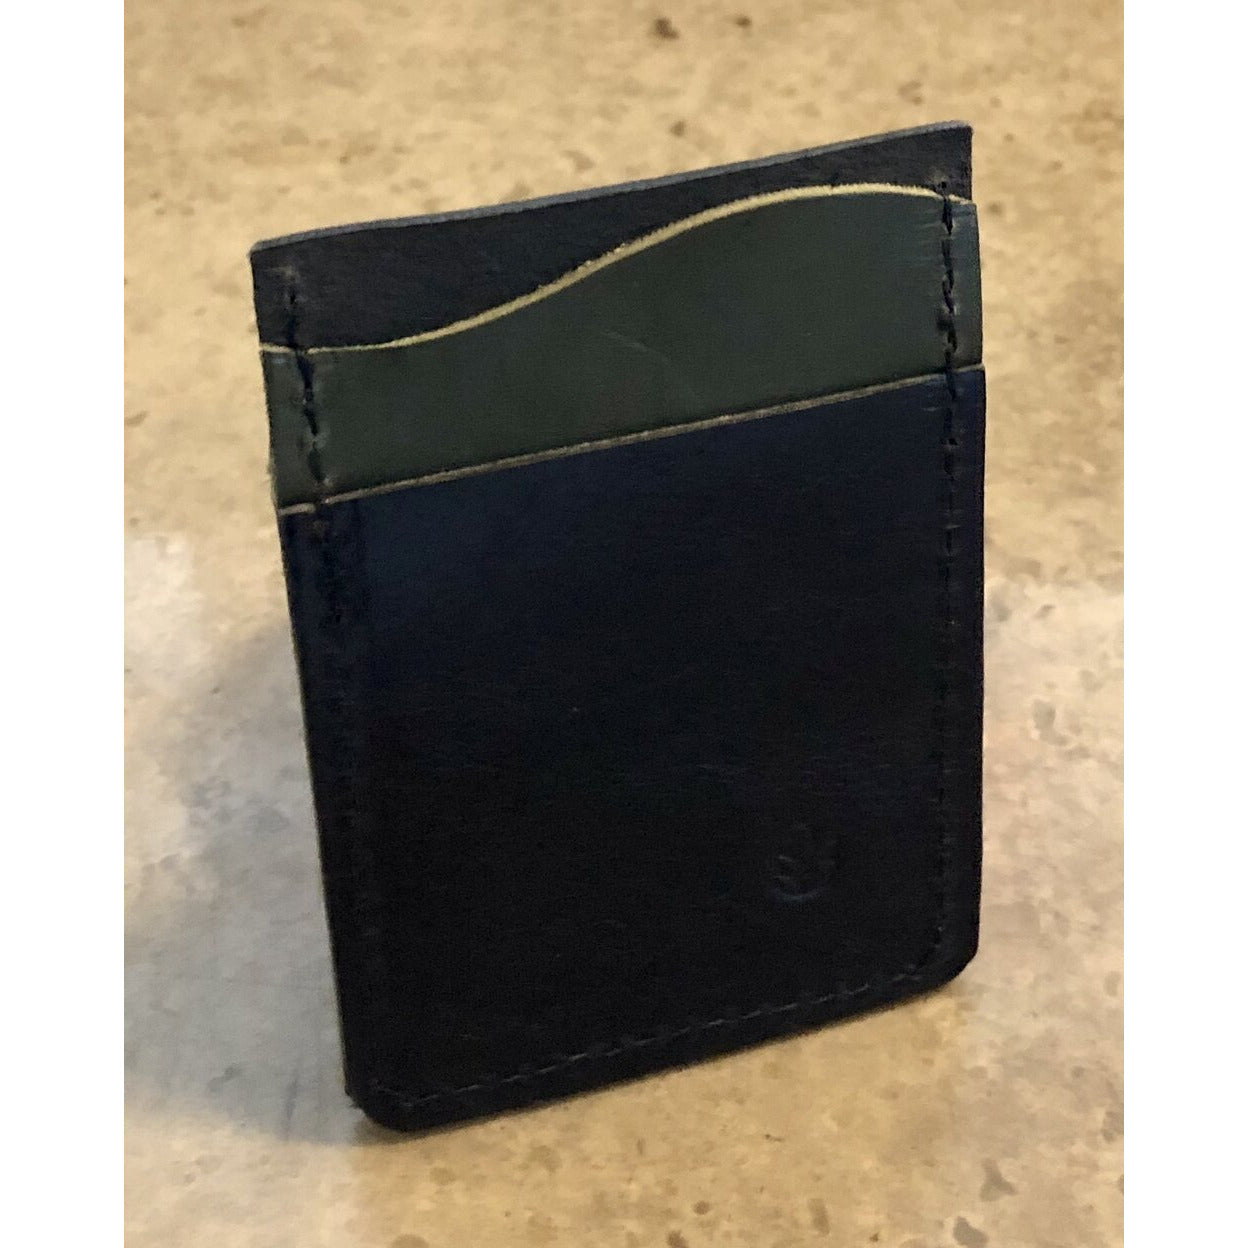 "Just the Essentials" Leather Card Wallet backside view in black and green